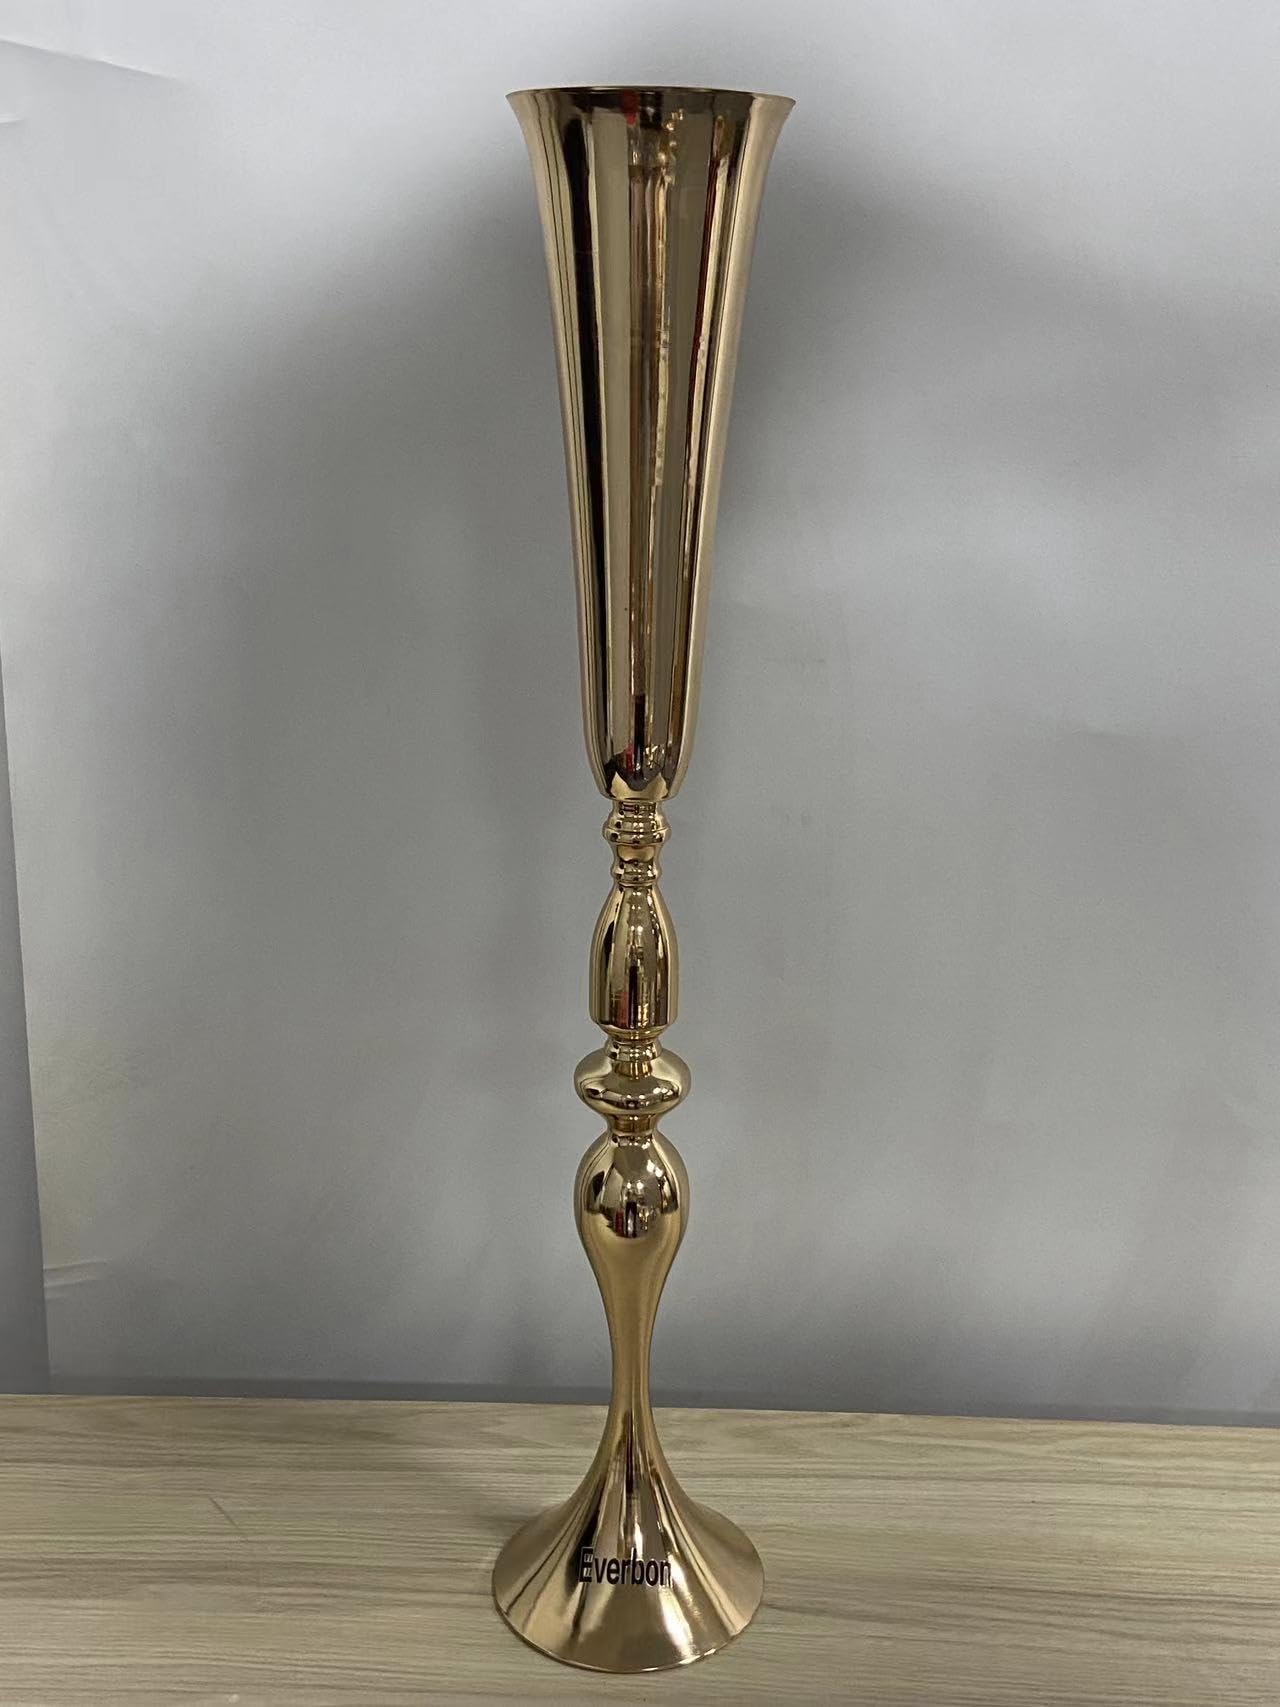 Everbon Gold Metal Trumpet Vase Decorative Centerpieces, 34.6 Inches Tall, 10 Pieces